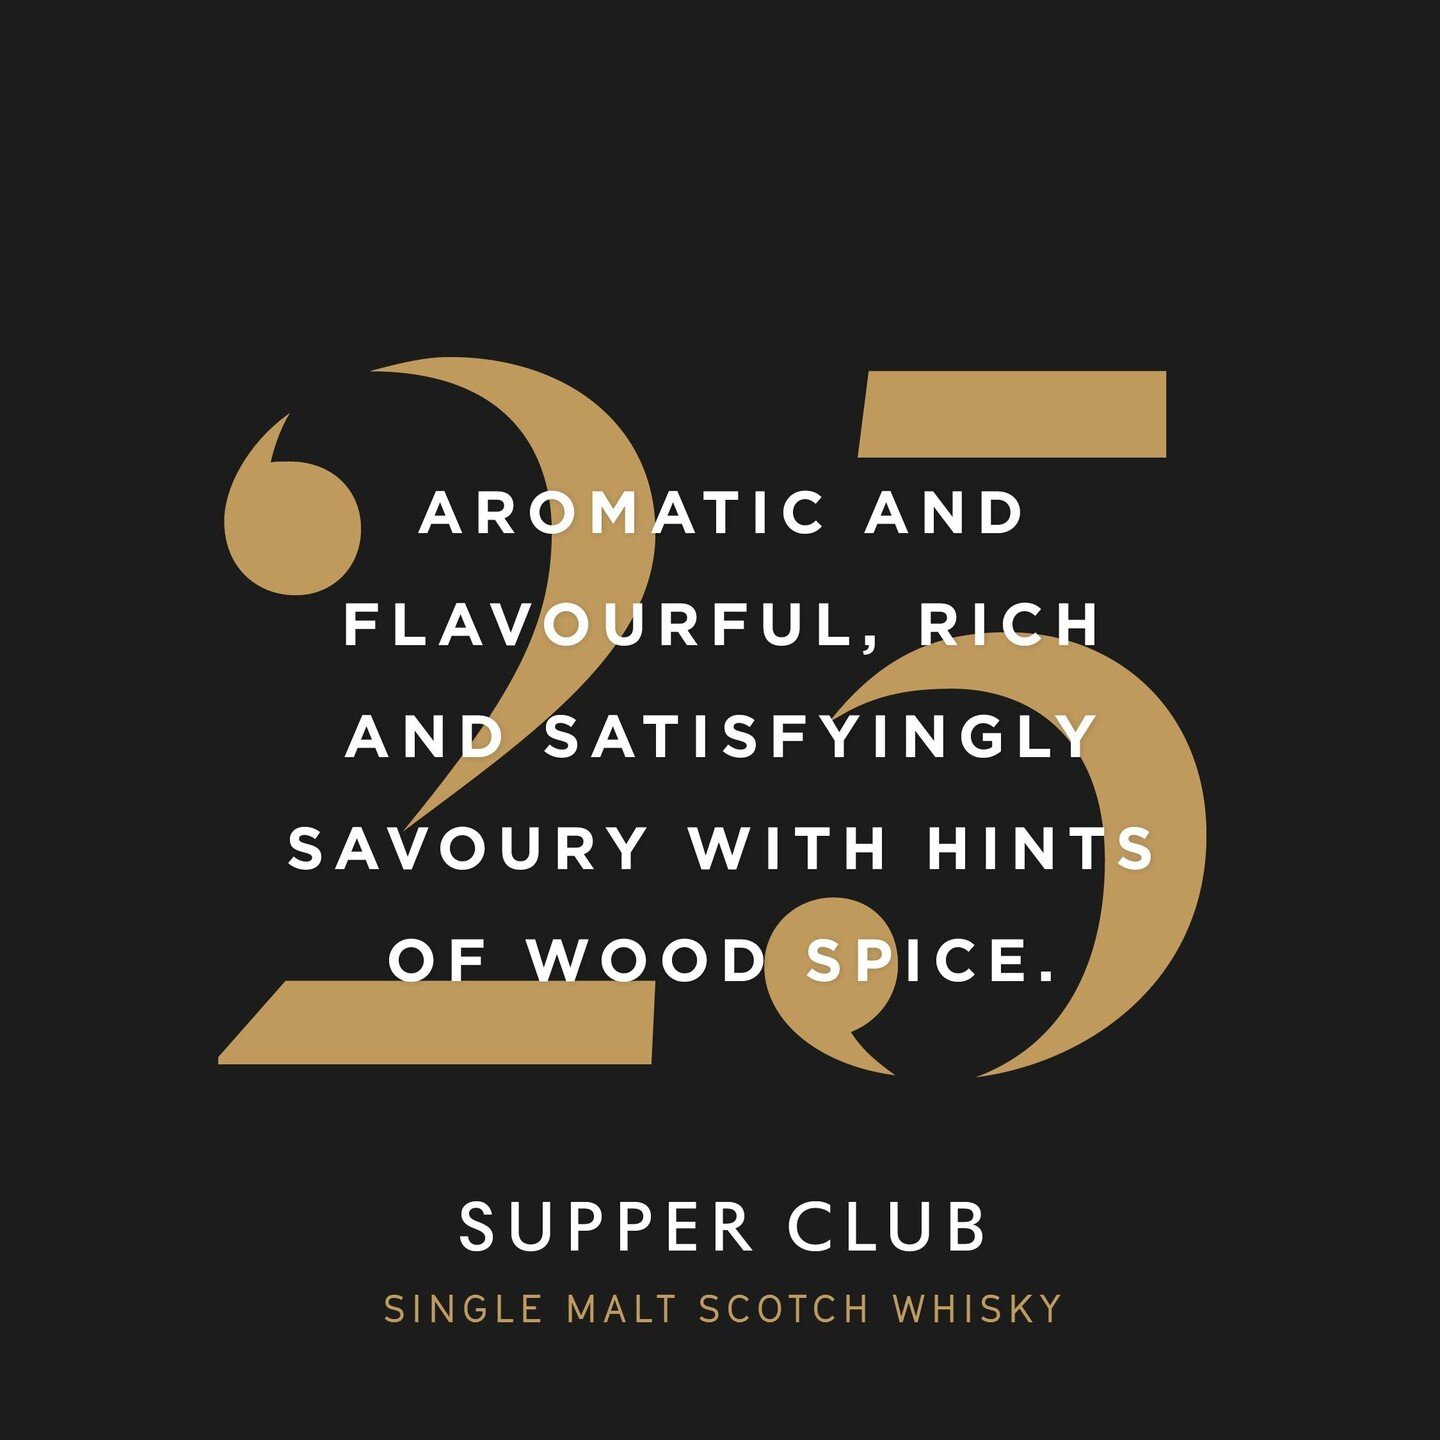 Introducing Supper Club, our exclusive new single cask release from Mortlach Distillery.

Aged 25 years, Supper Club is an aromatic, flavourful dram that's rich and satisfyingly savoury with hints of wood spice.

Dense yet intriguing, think roast chi